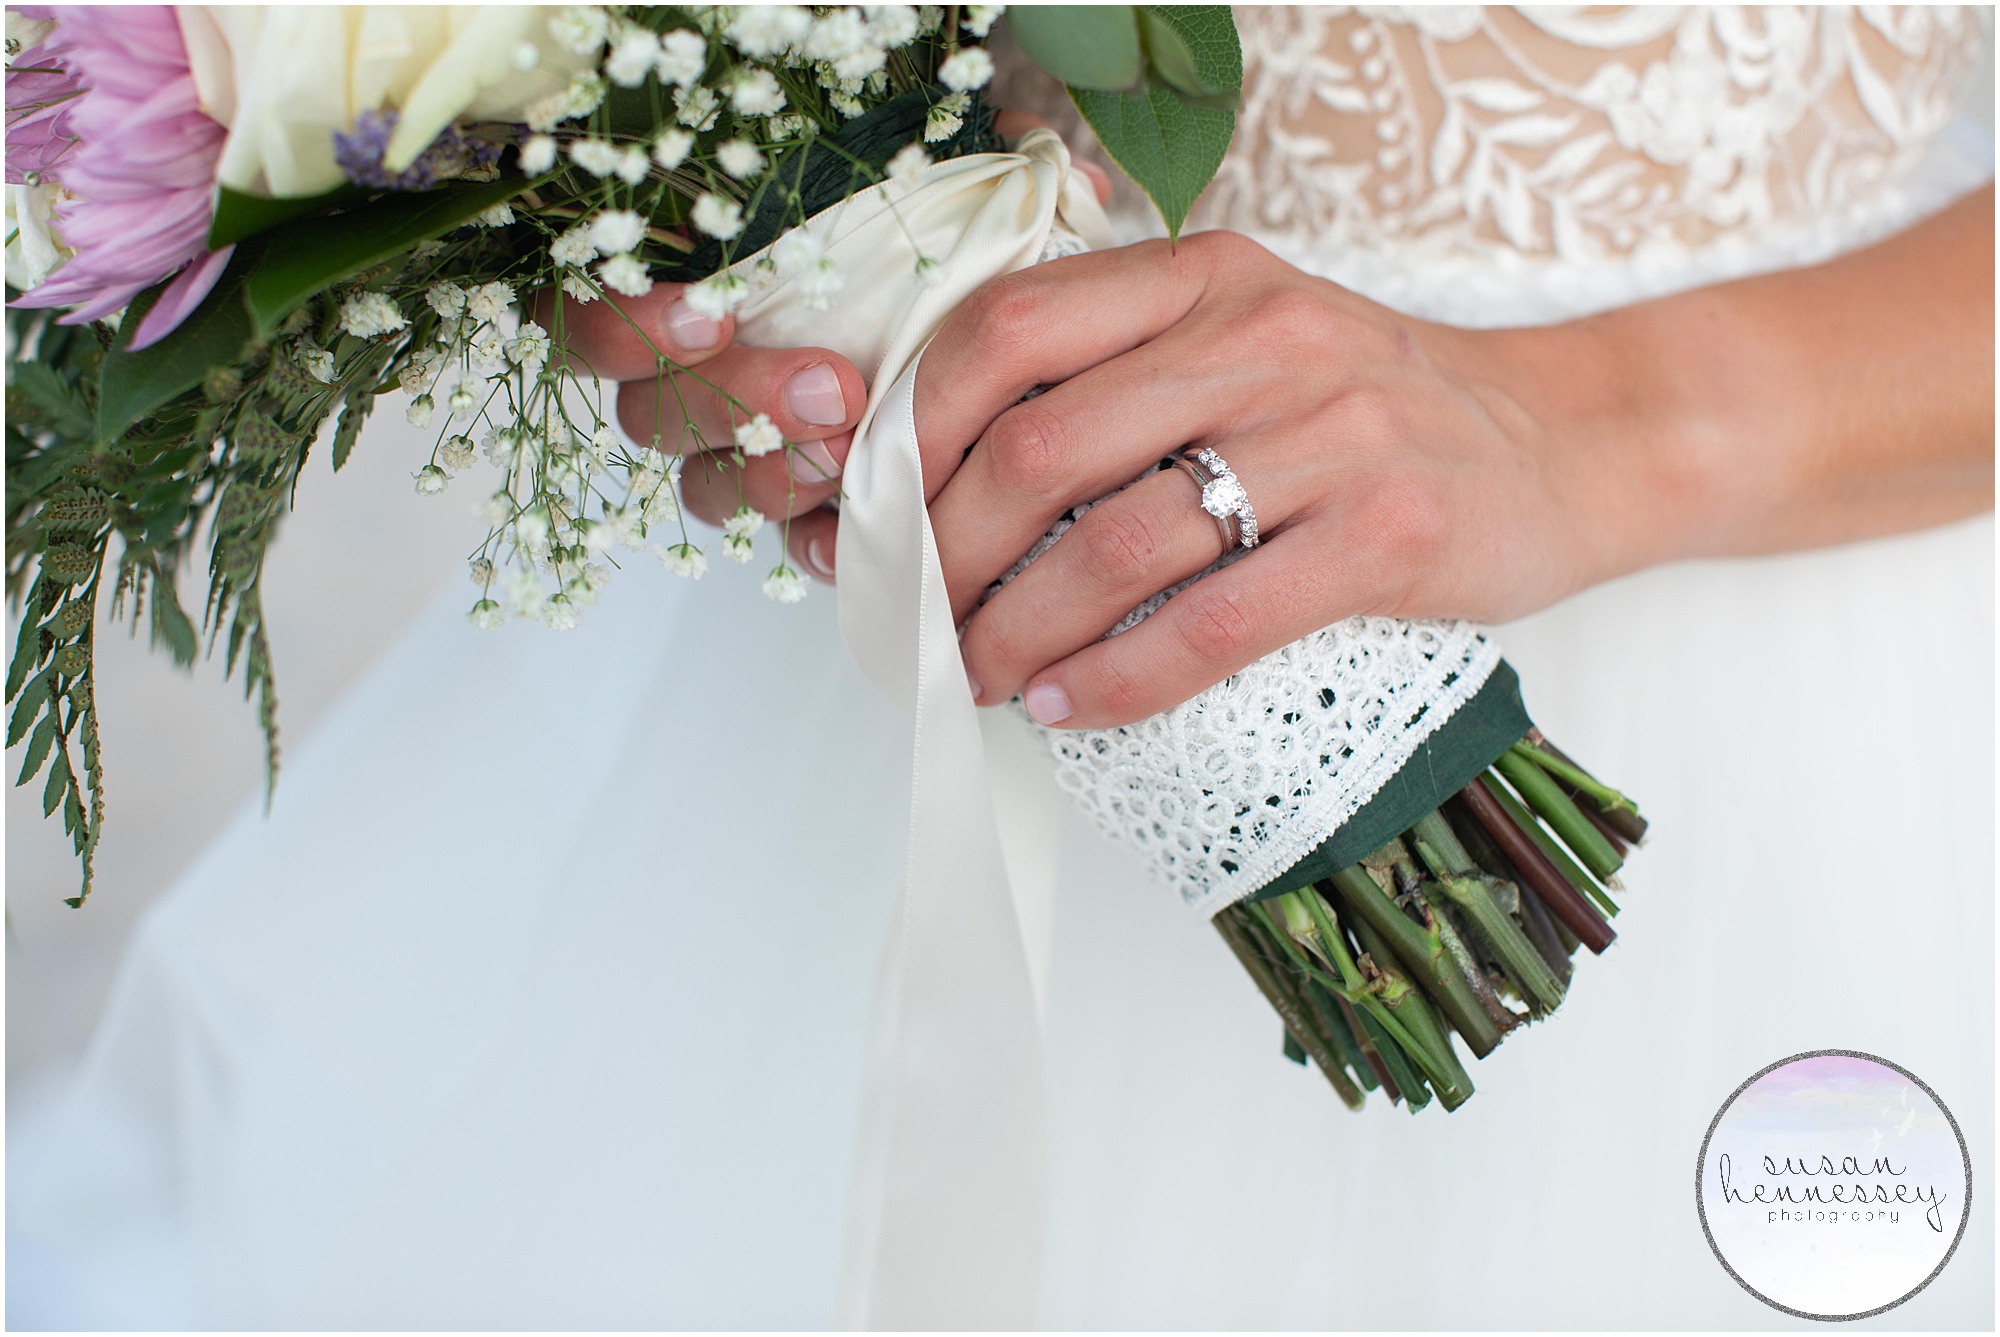 Close up of bride's weding ring and wedding band at microwedding